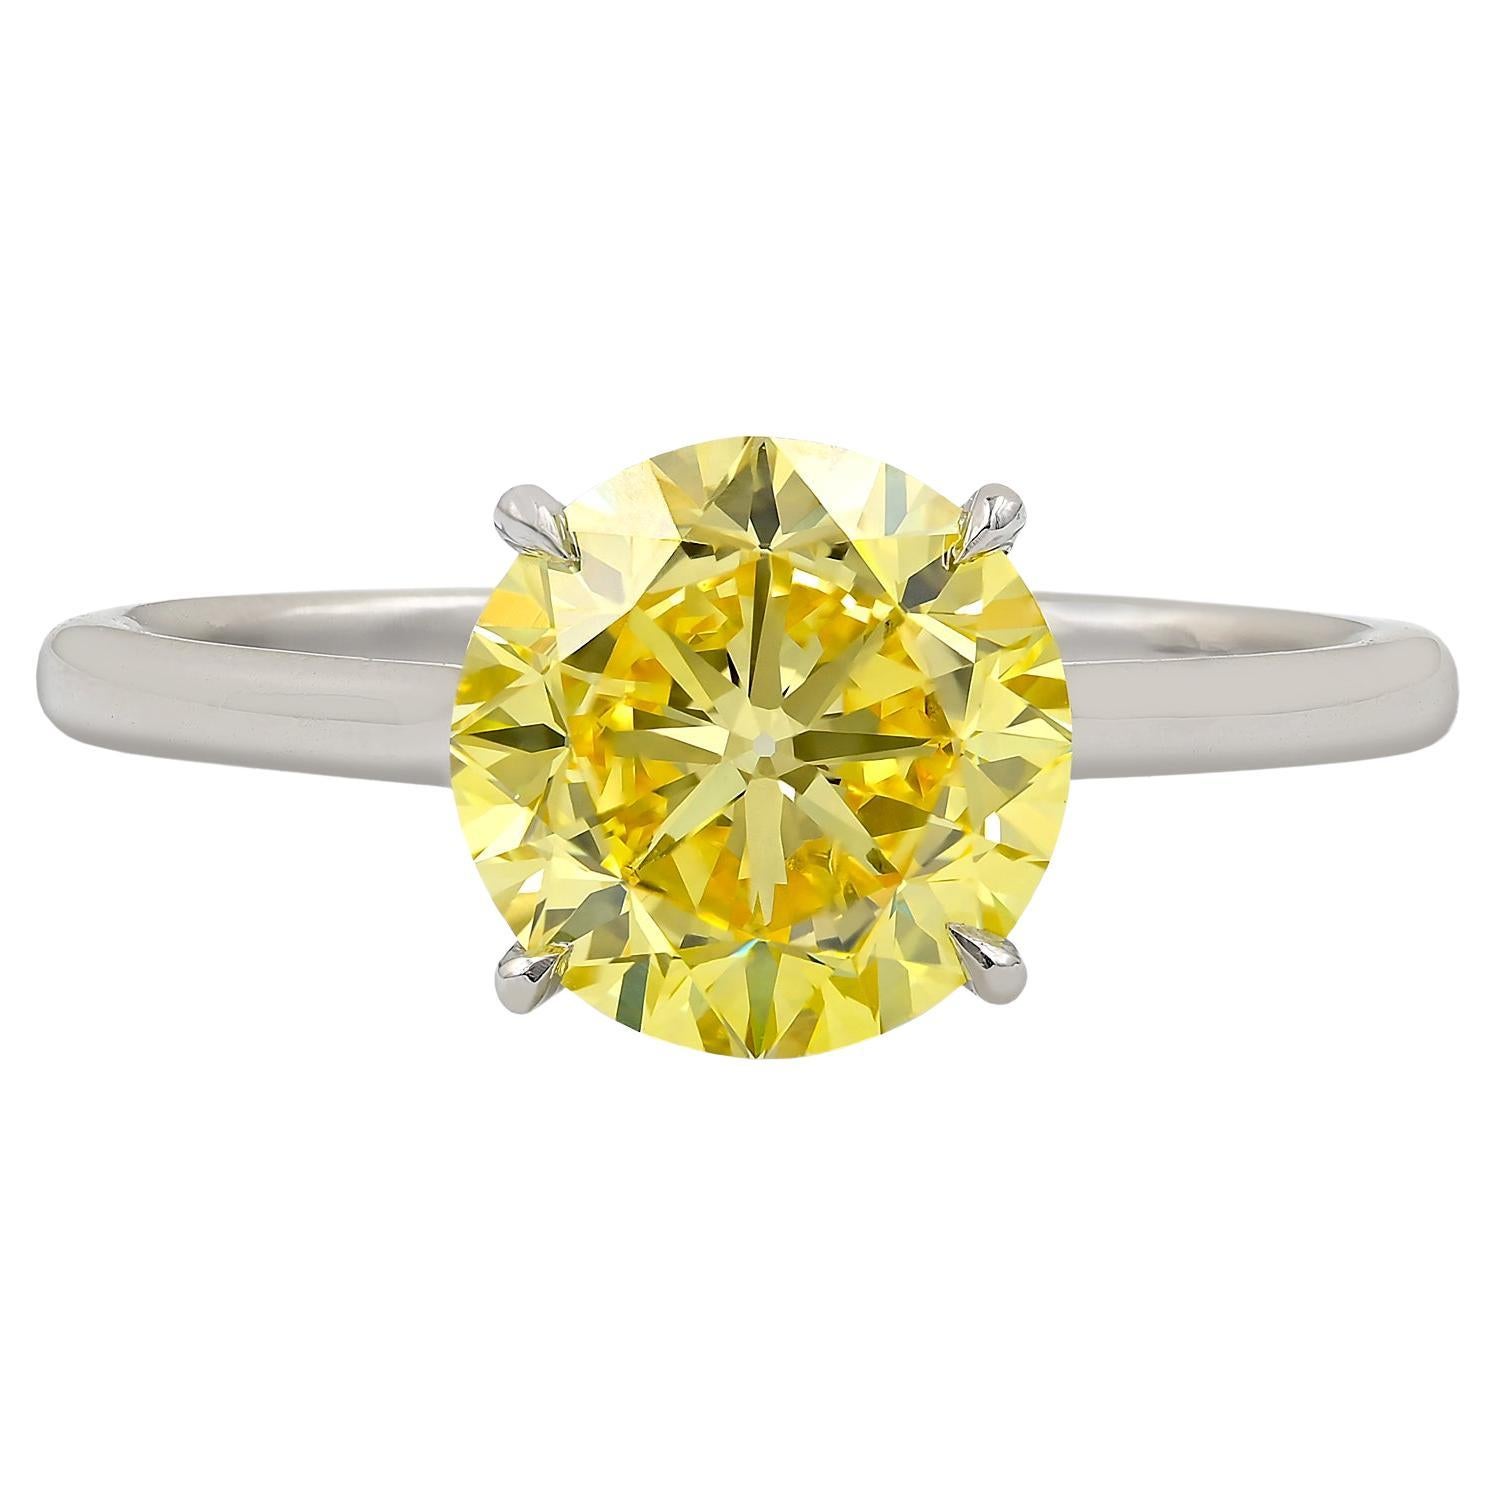 Spectra Fine Jewelry GIA Certified 2.37 Carat Vivid Yellow Diamond Ring For Sale